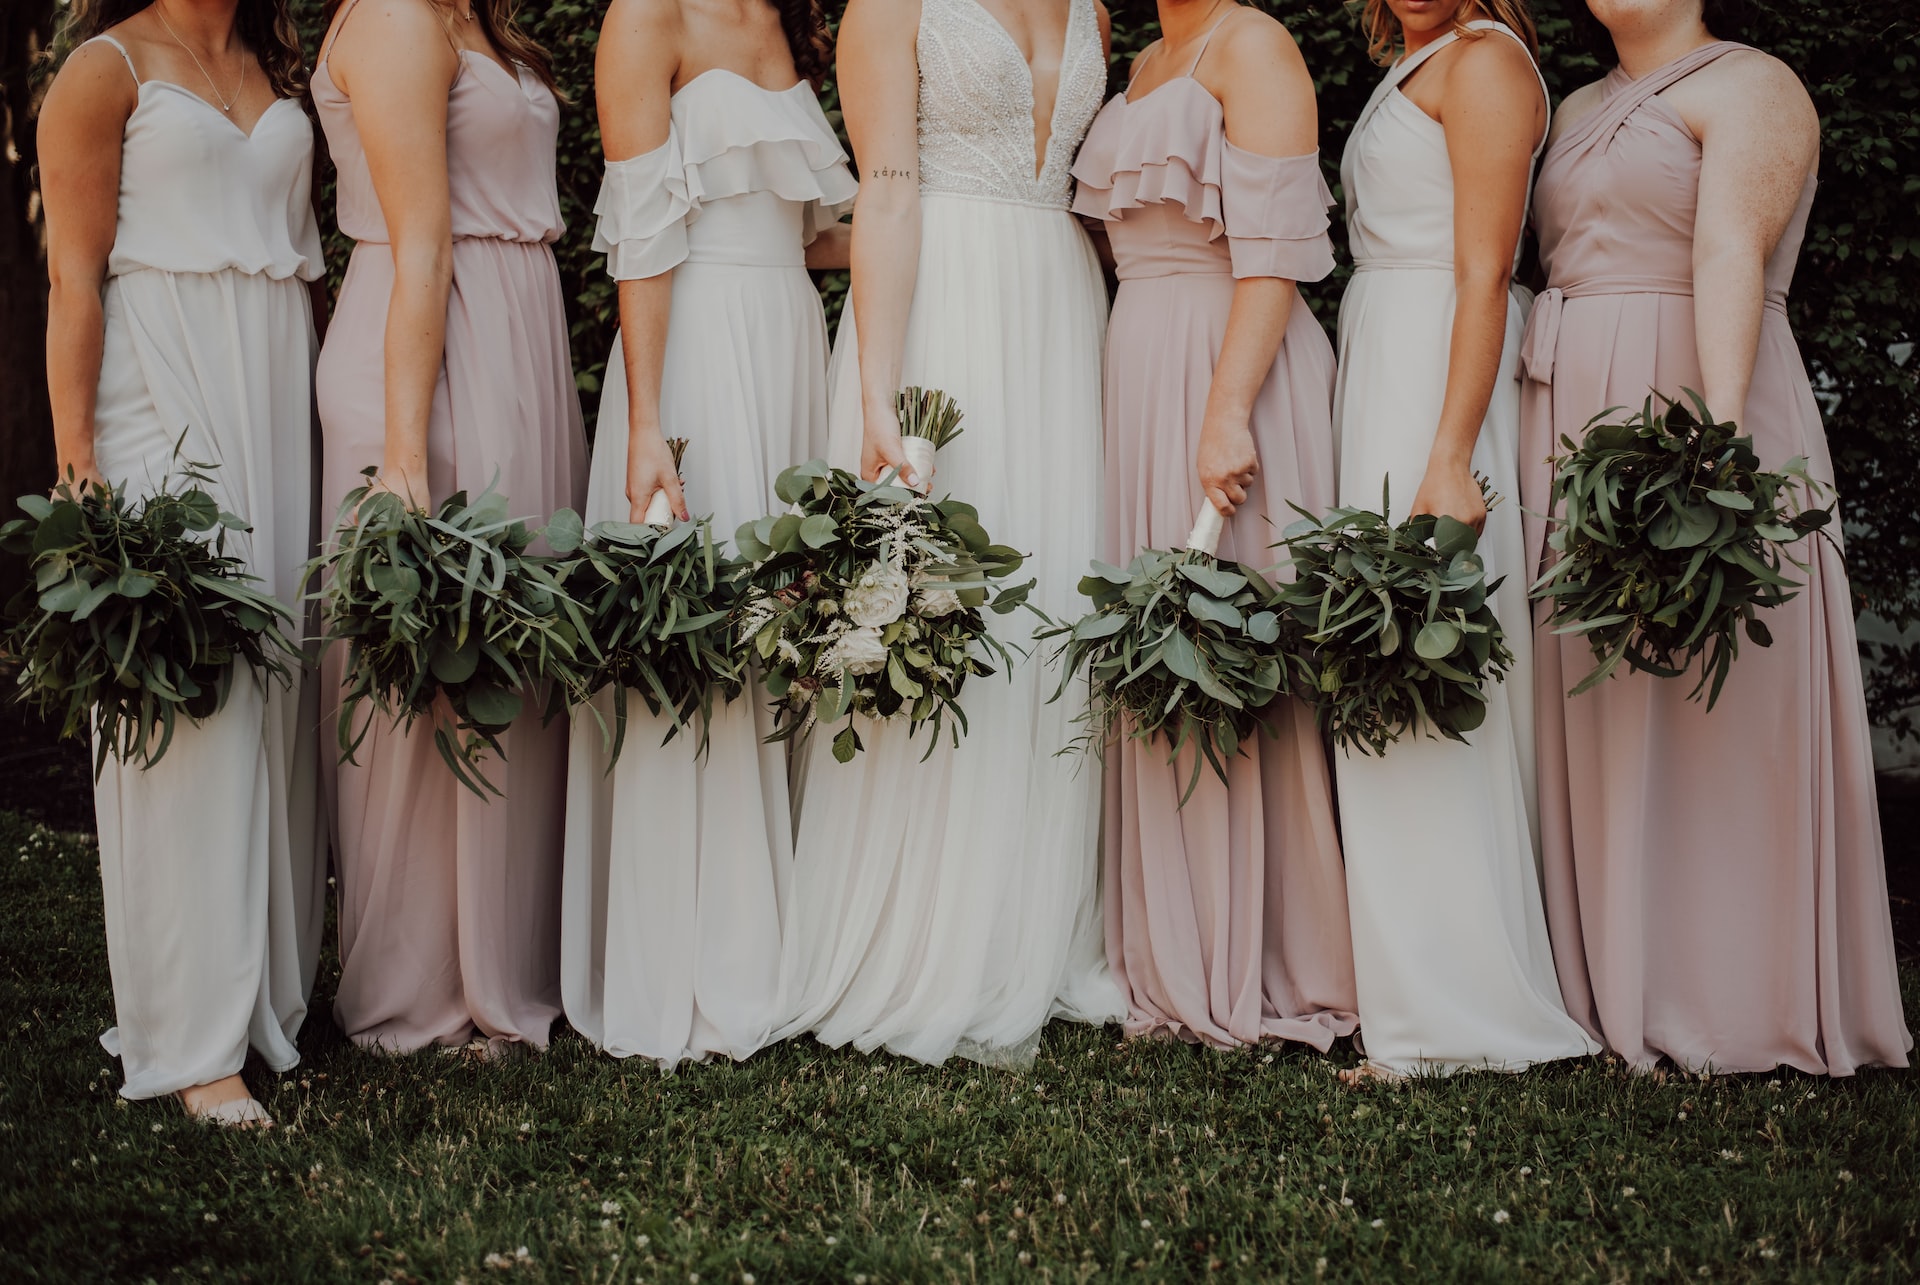 The cost of being a bridesmaid